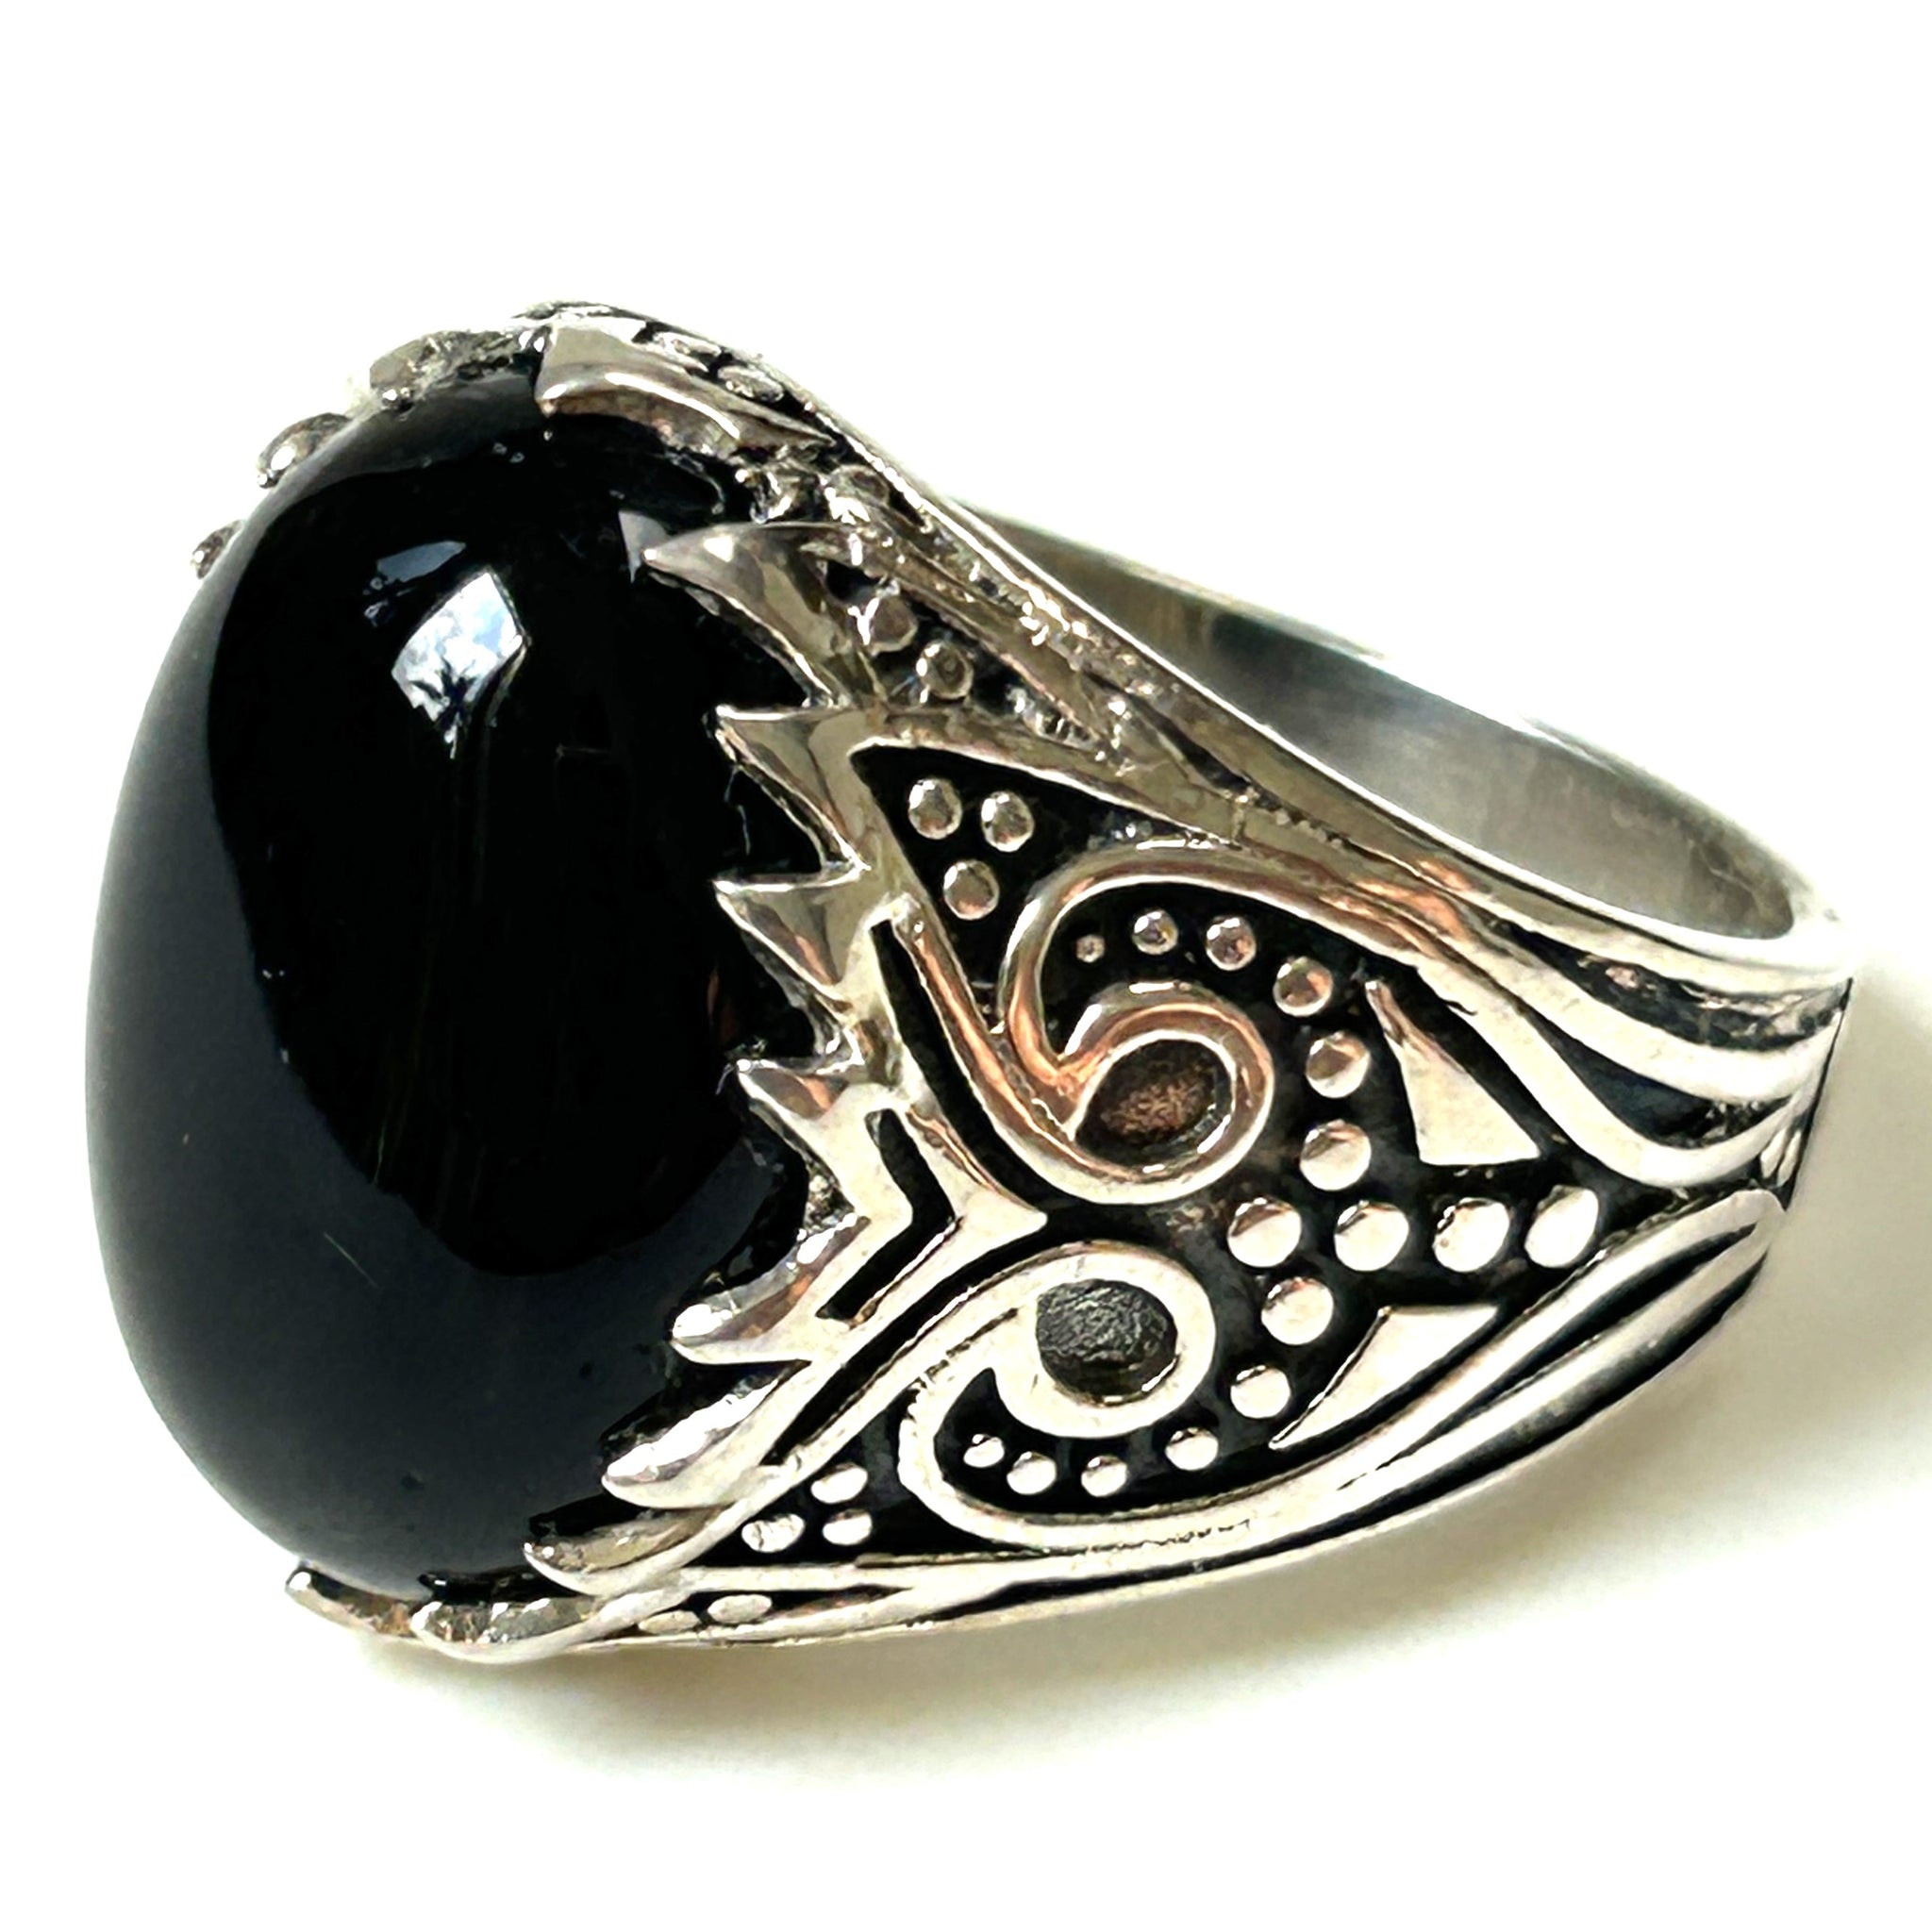 Decorative Sterling Silver and Onyx Ring